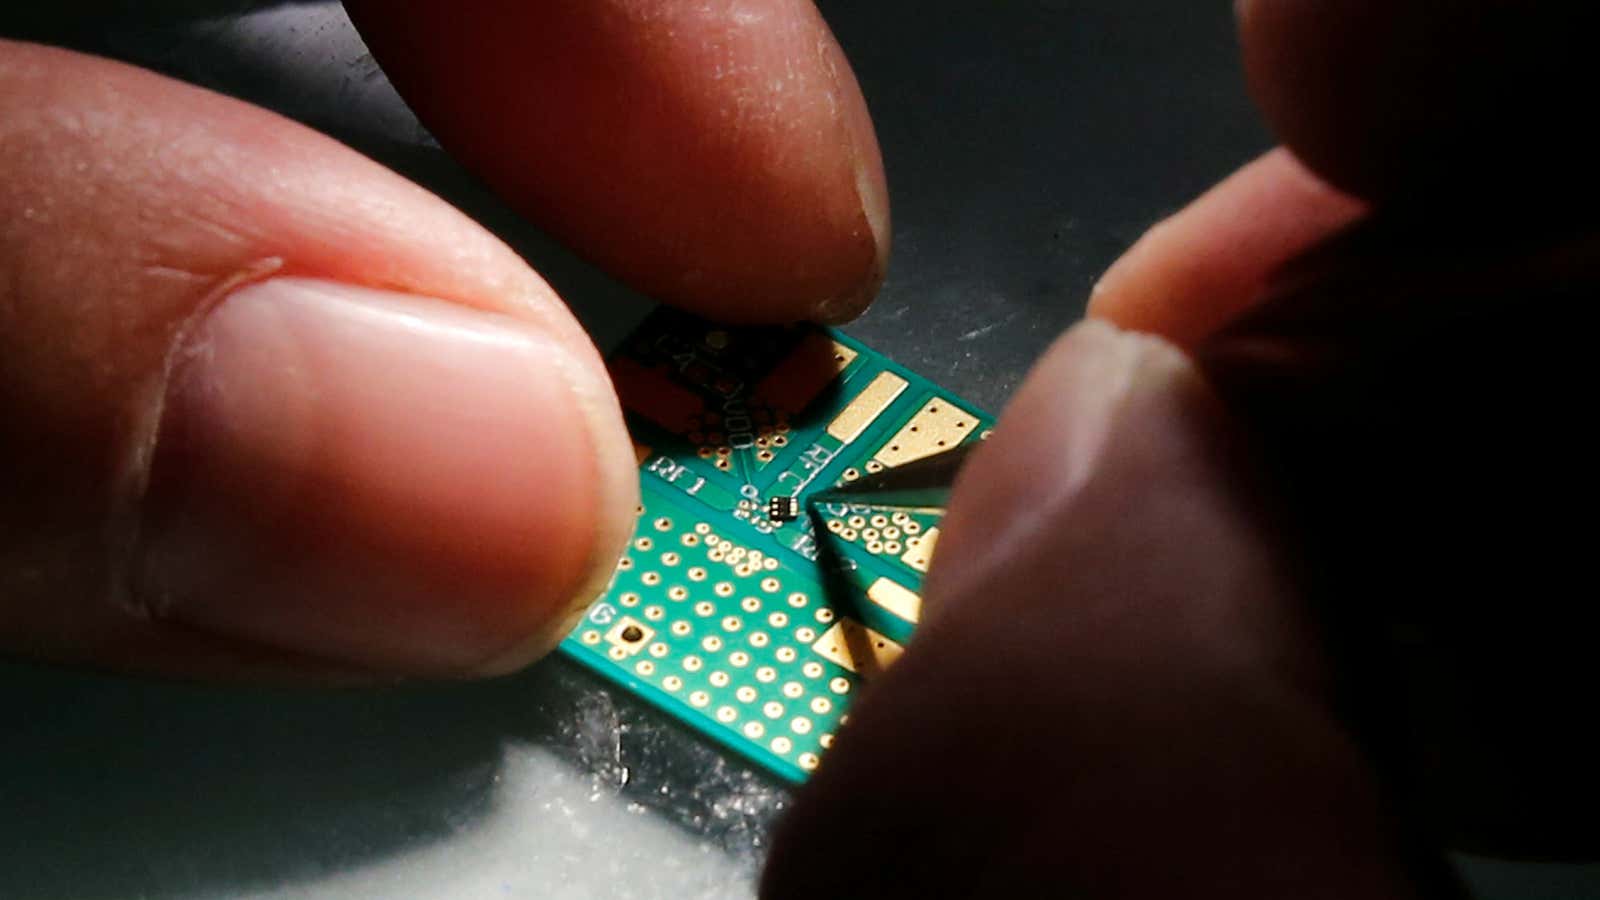 A researcher plants a semiconductor on an interface board during a research work to design and develop a semiconductor product at Tsinghua Unigroup research centre…